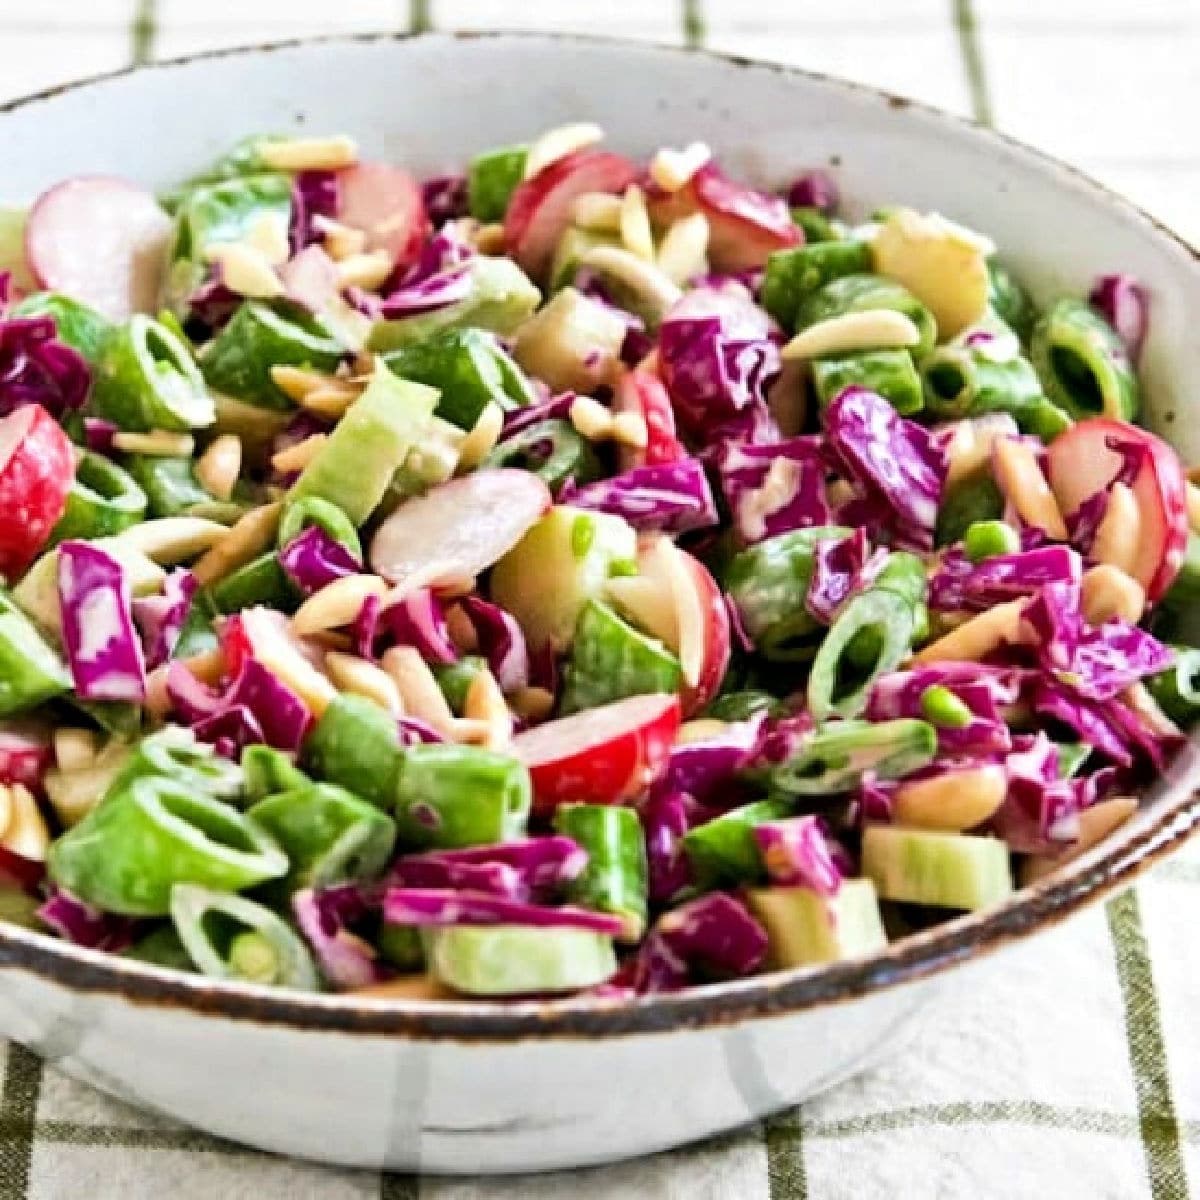 Square image for Asian Chopped Salad shown in serving bowl on napkin.